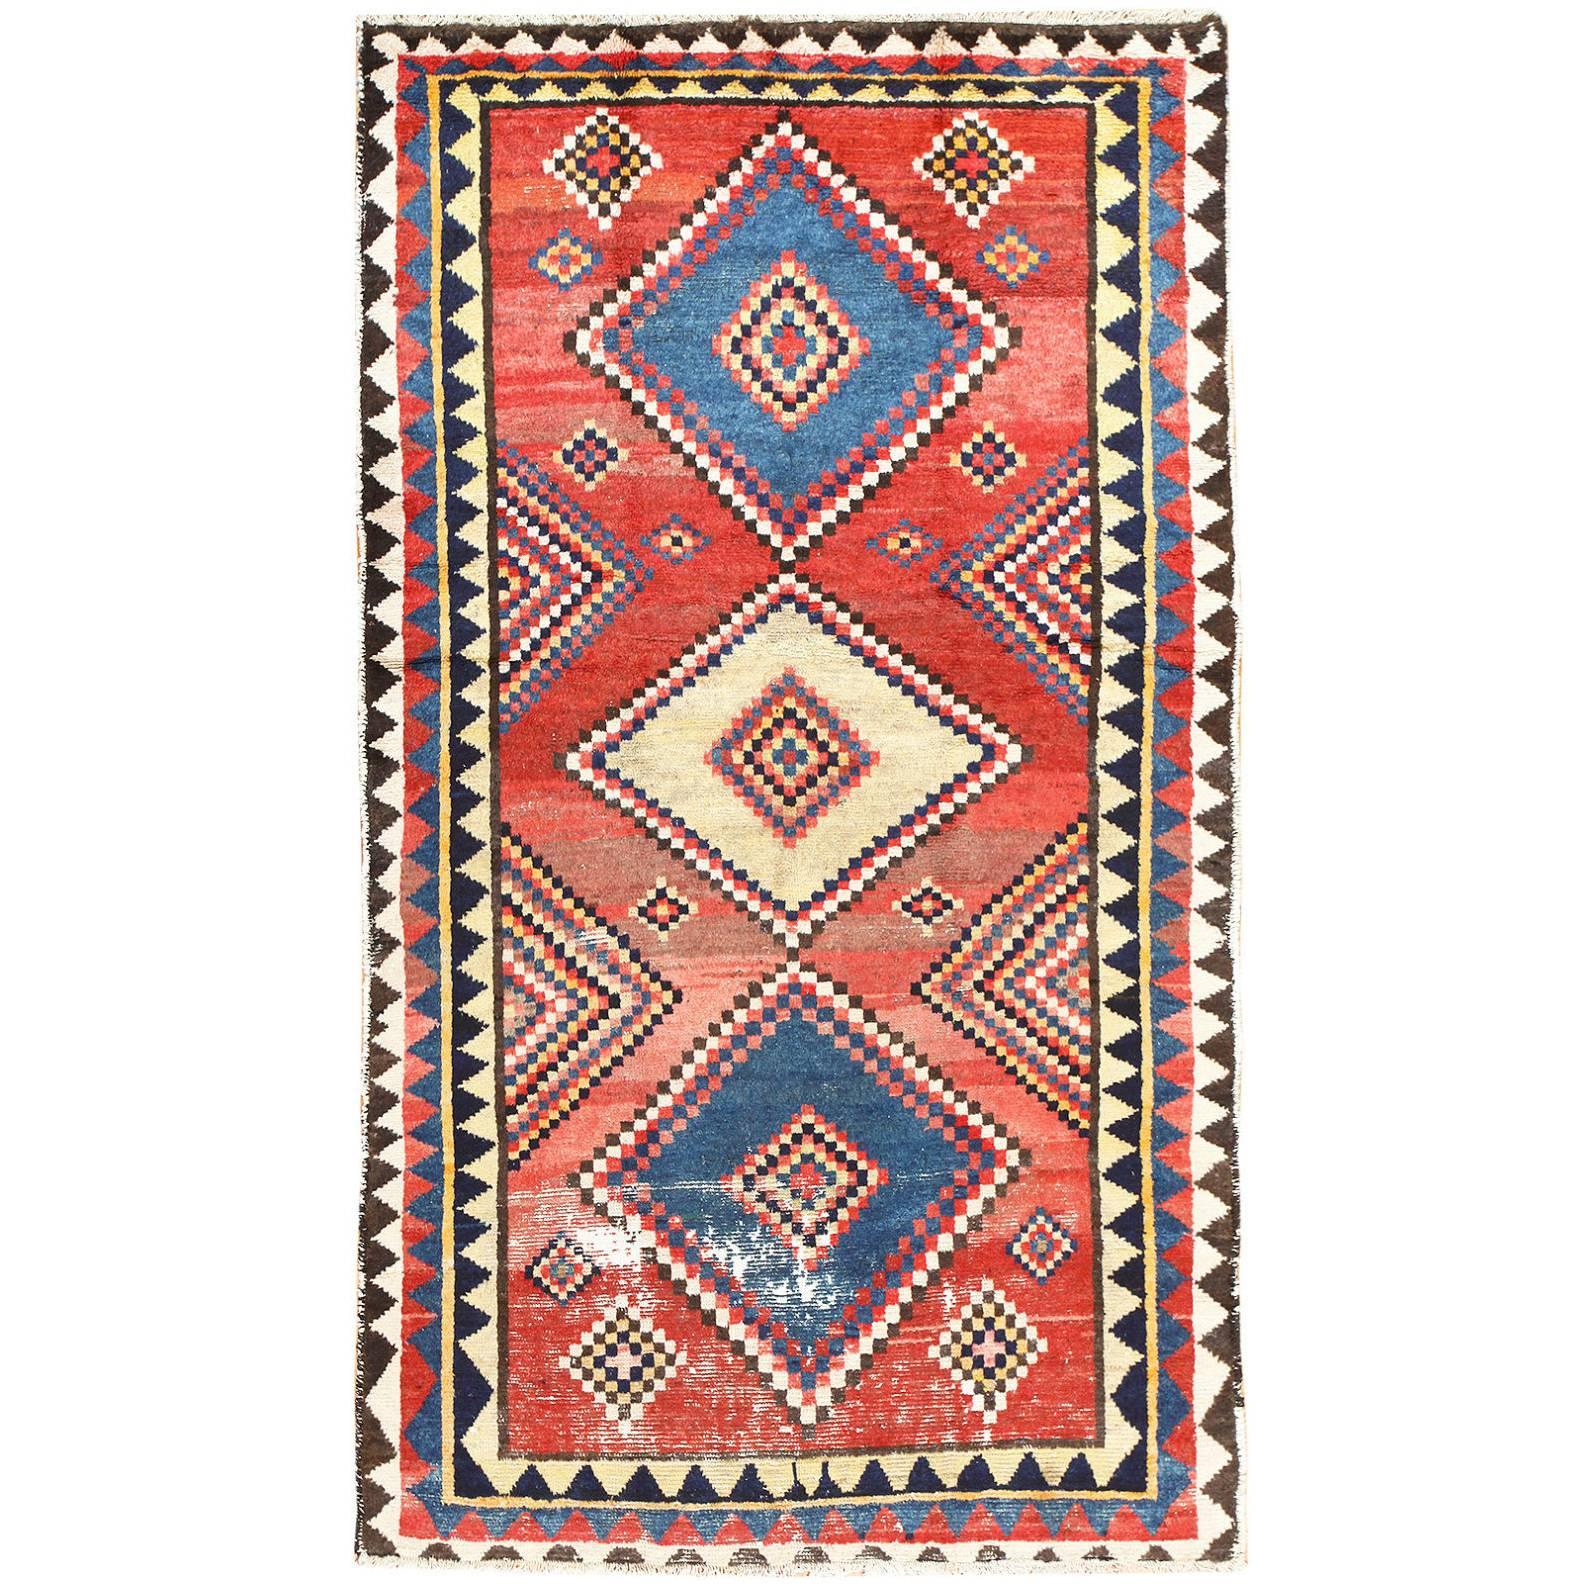 Vintage Tribal Shabby Chic Persian Gabbeh Rug. Size: 5 ft x 8 ft 8 in